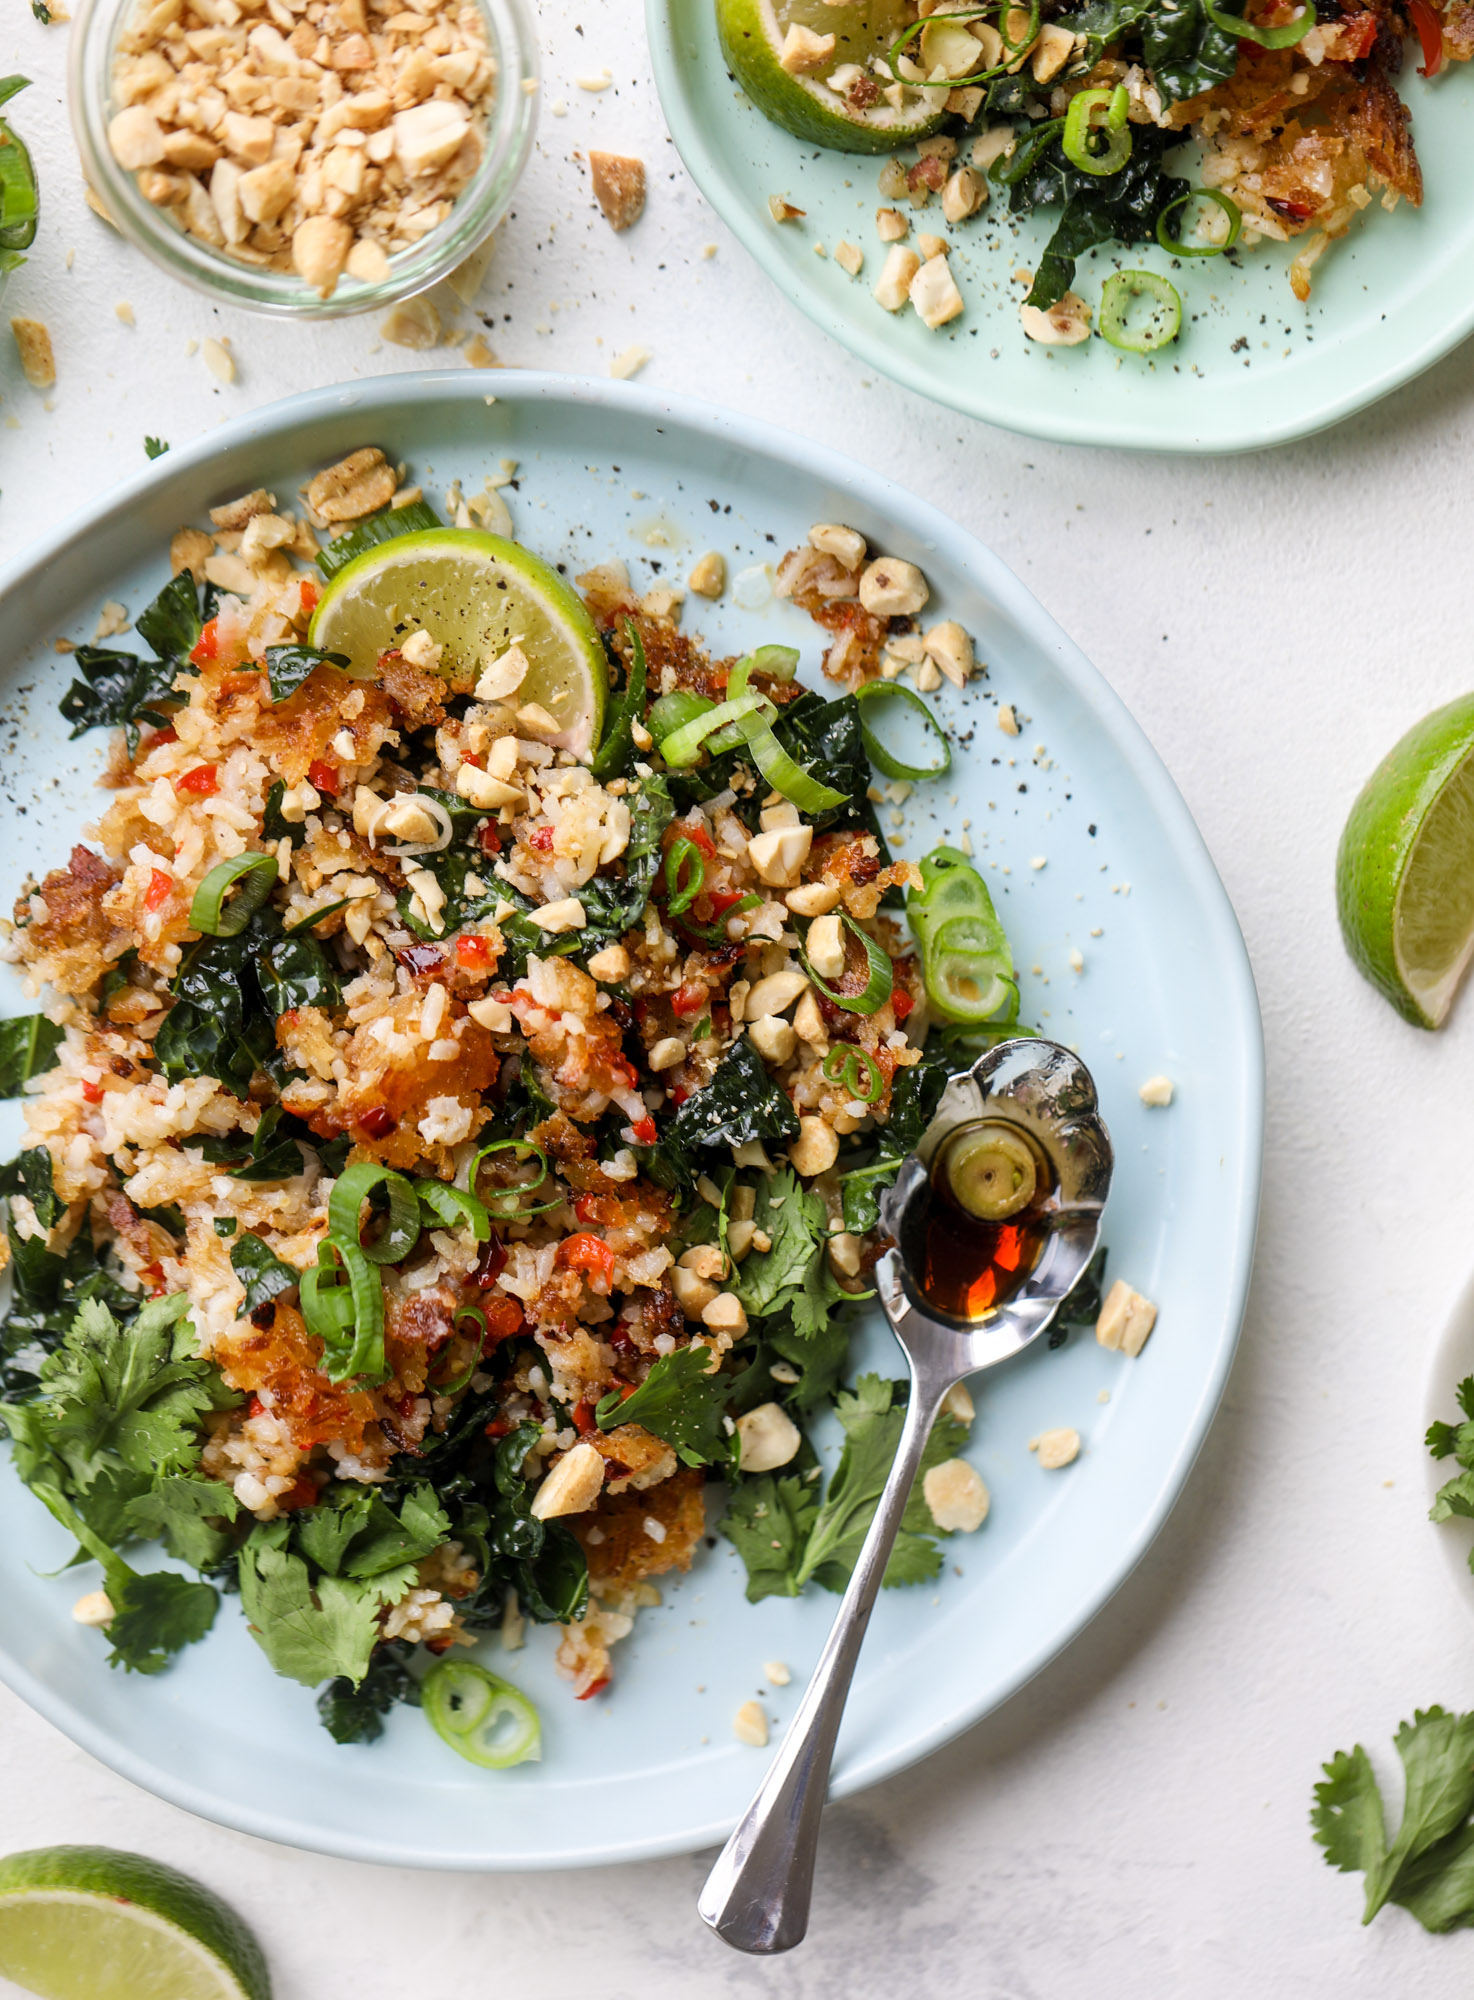 This crispy rice salad is the best lunch I've had in ages! It's full of crunch and crisp, it's satisfying and has lots of green kale so we get our veg in. The crispy rice salad can be a meal, you can add beans or rice or it can even be a side dish. I howsweeteats.com #rice #salad #vegetarian #crispy #kale